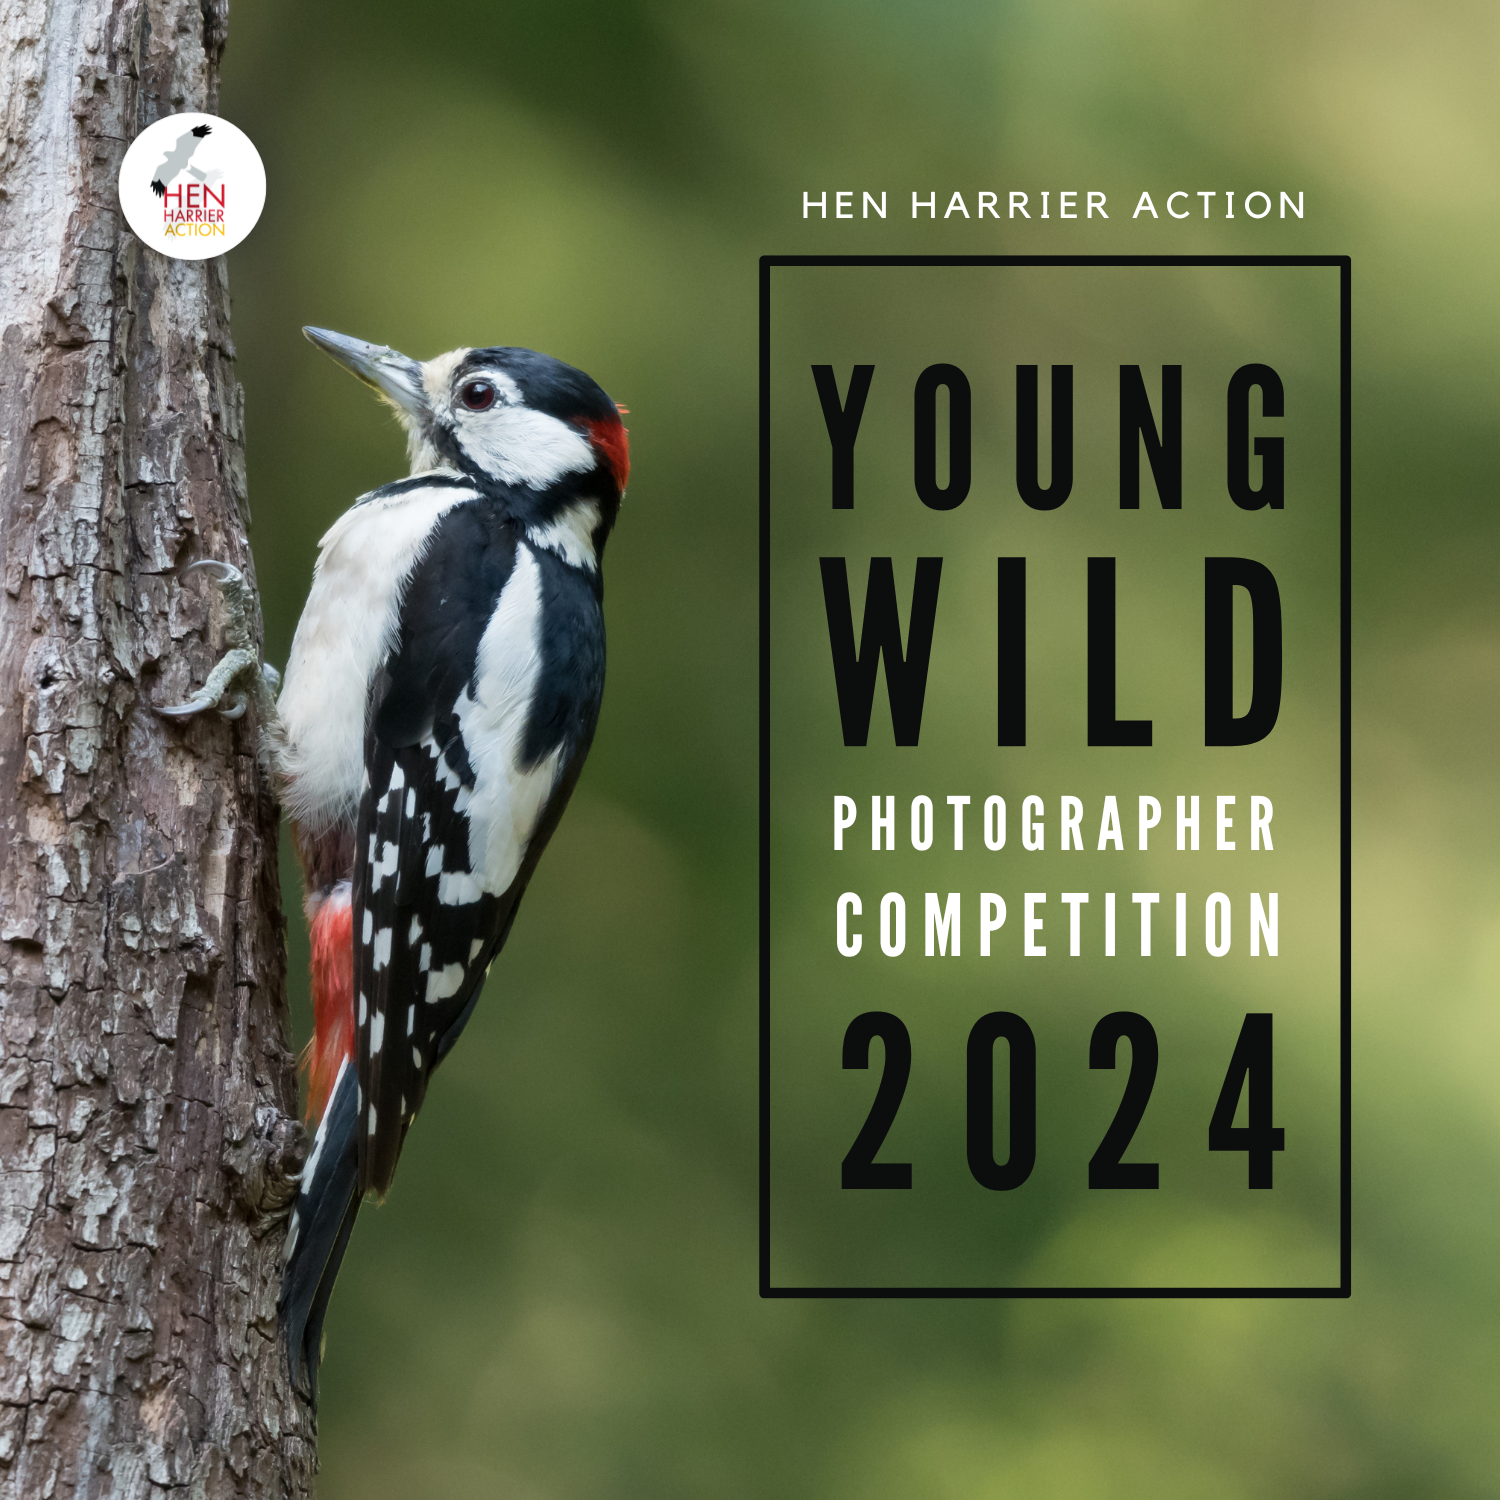 Young Wild Photographer competition poster with Great Spotted Woodpecker